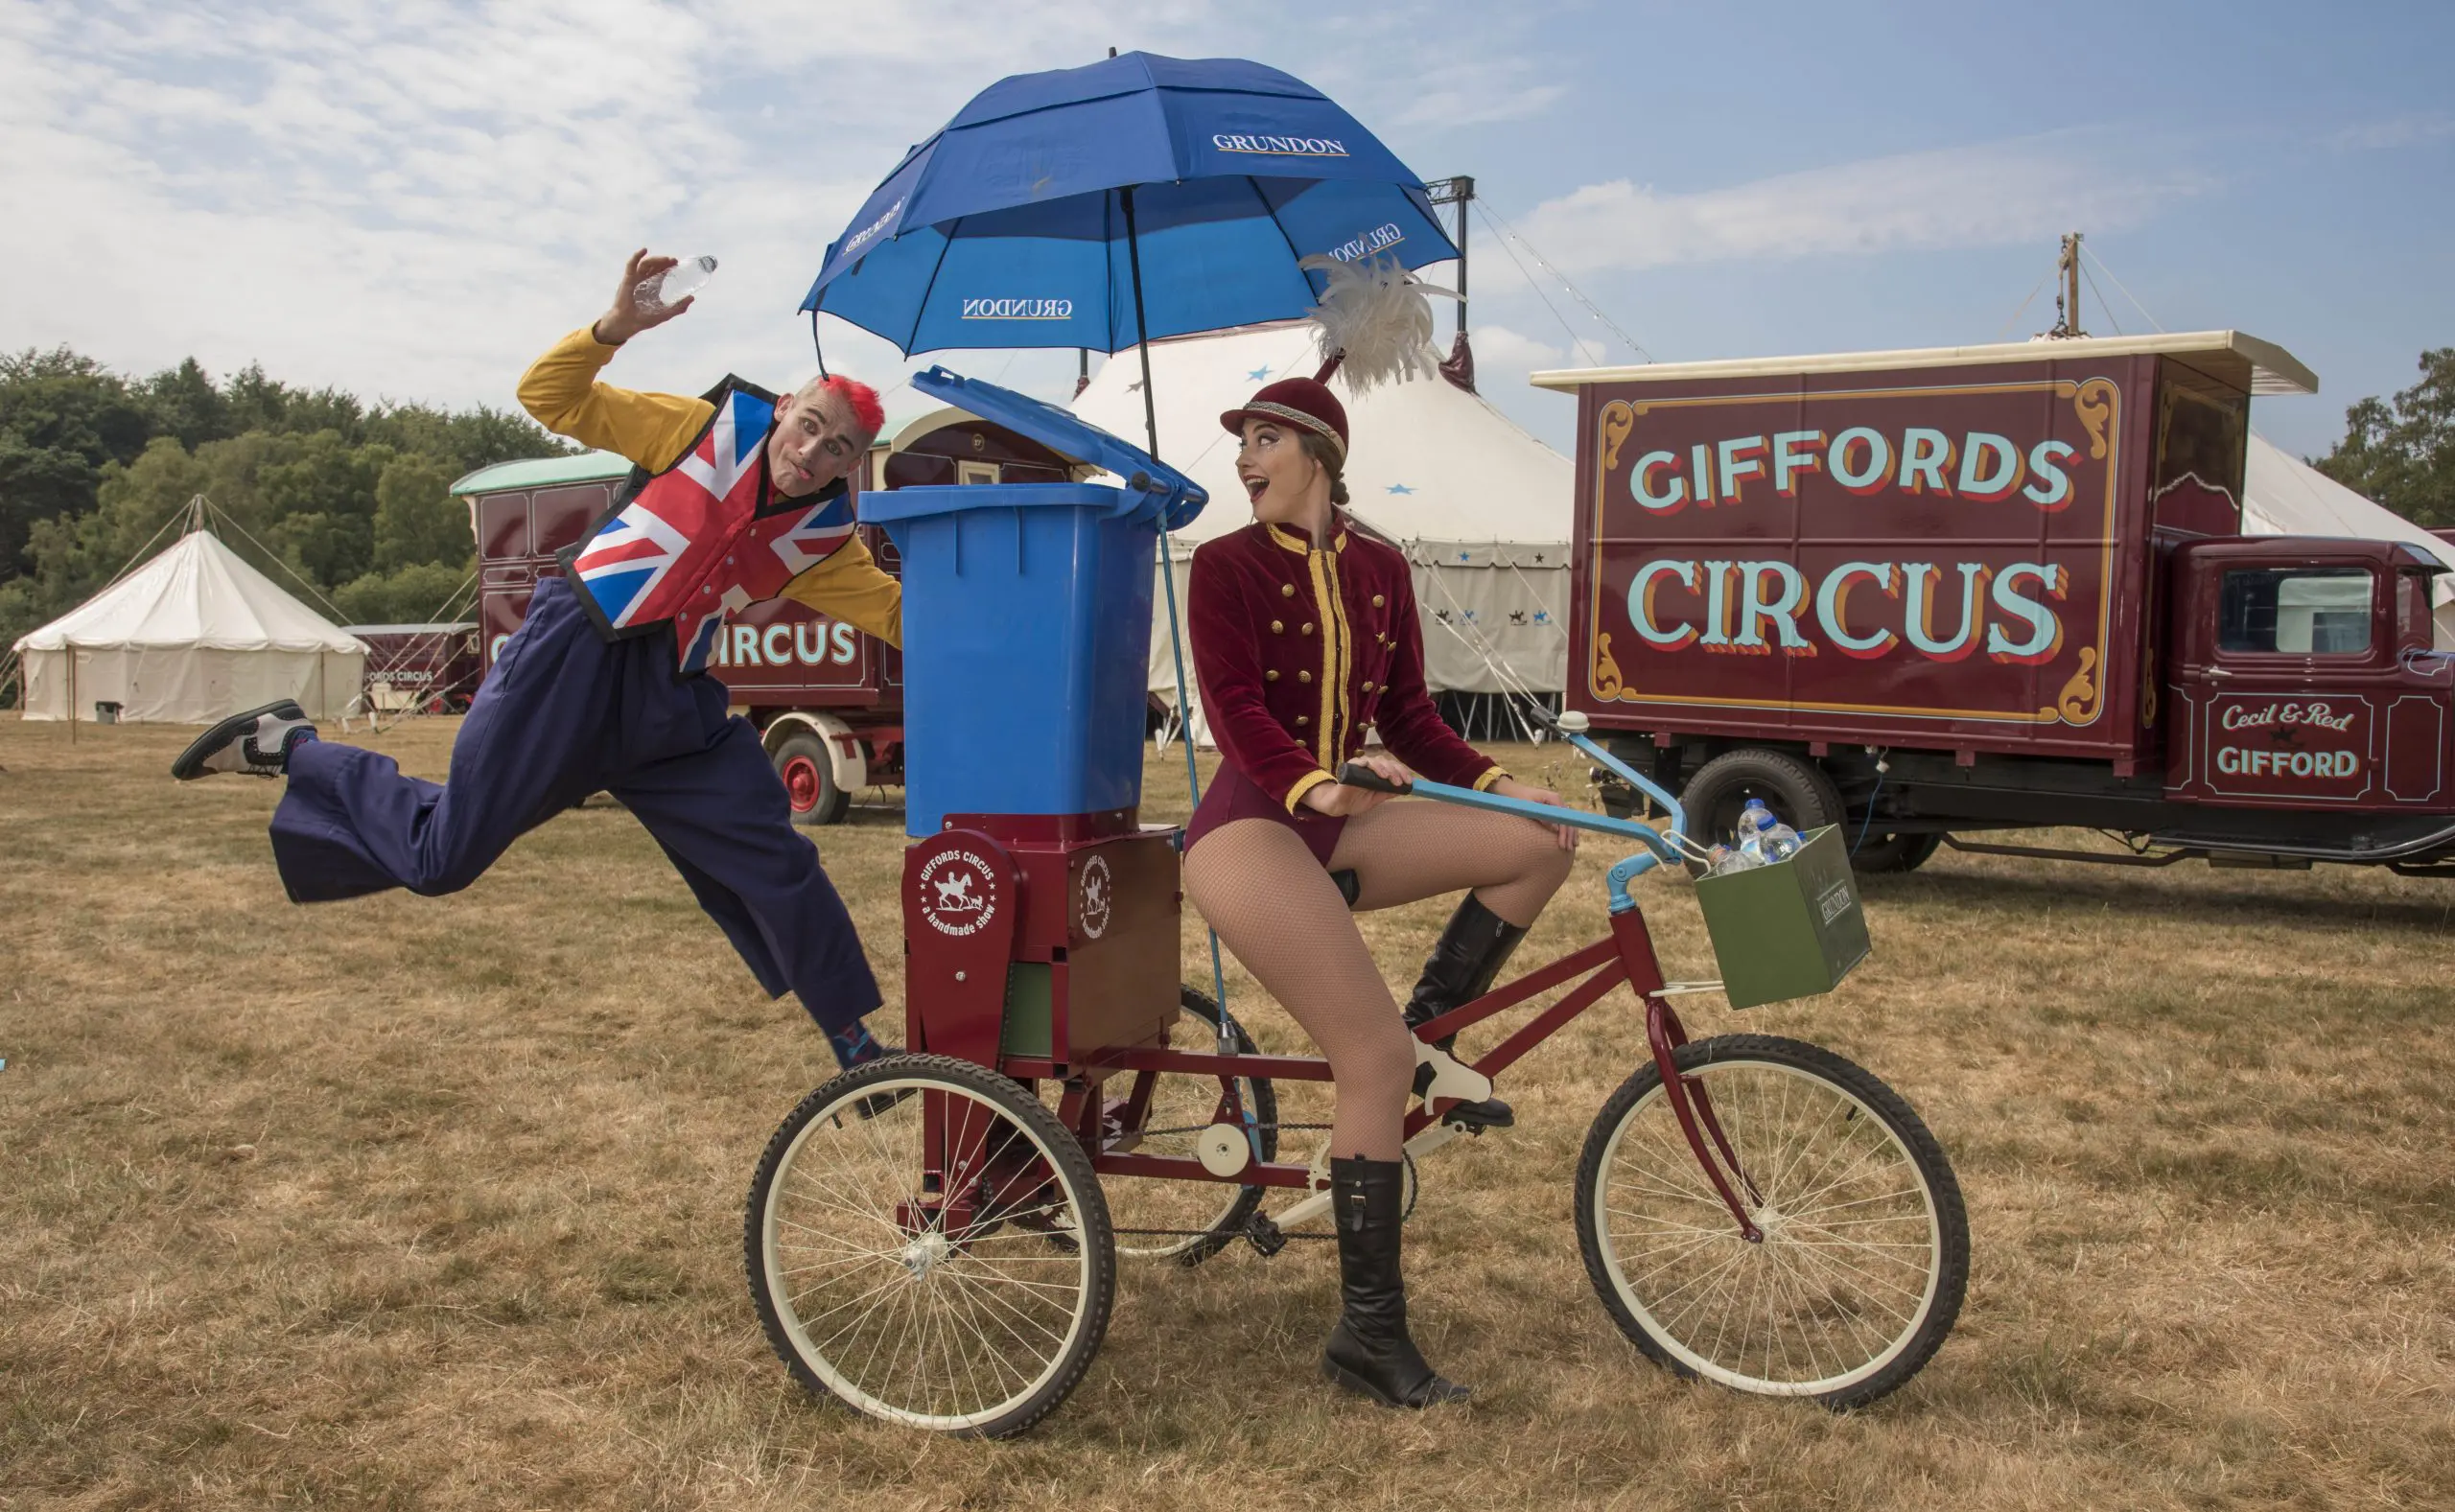 Tweedy and showgirl Lizzie clowning around on the Recycle Bicycle